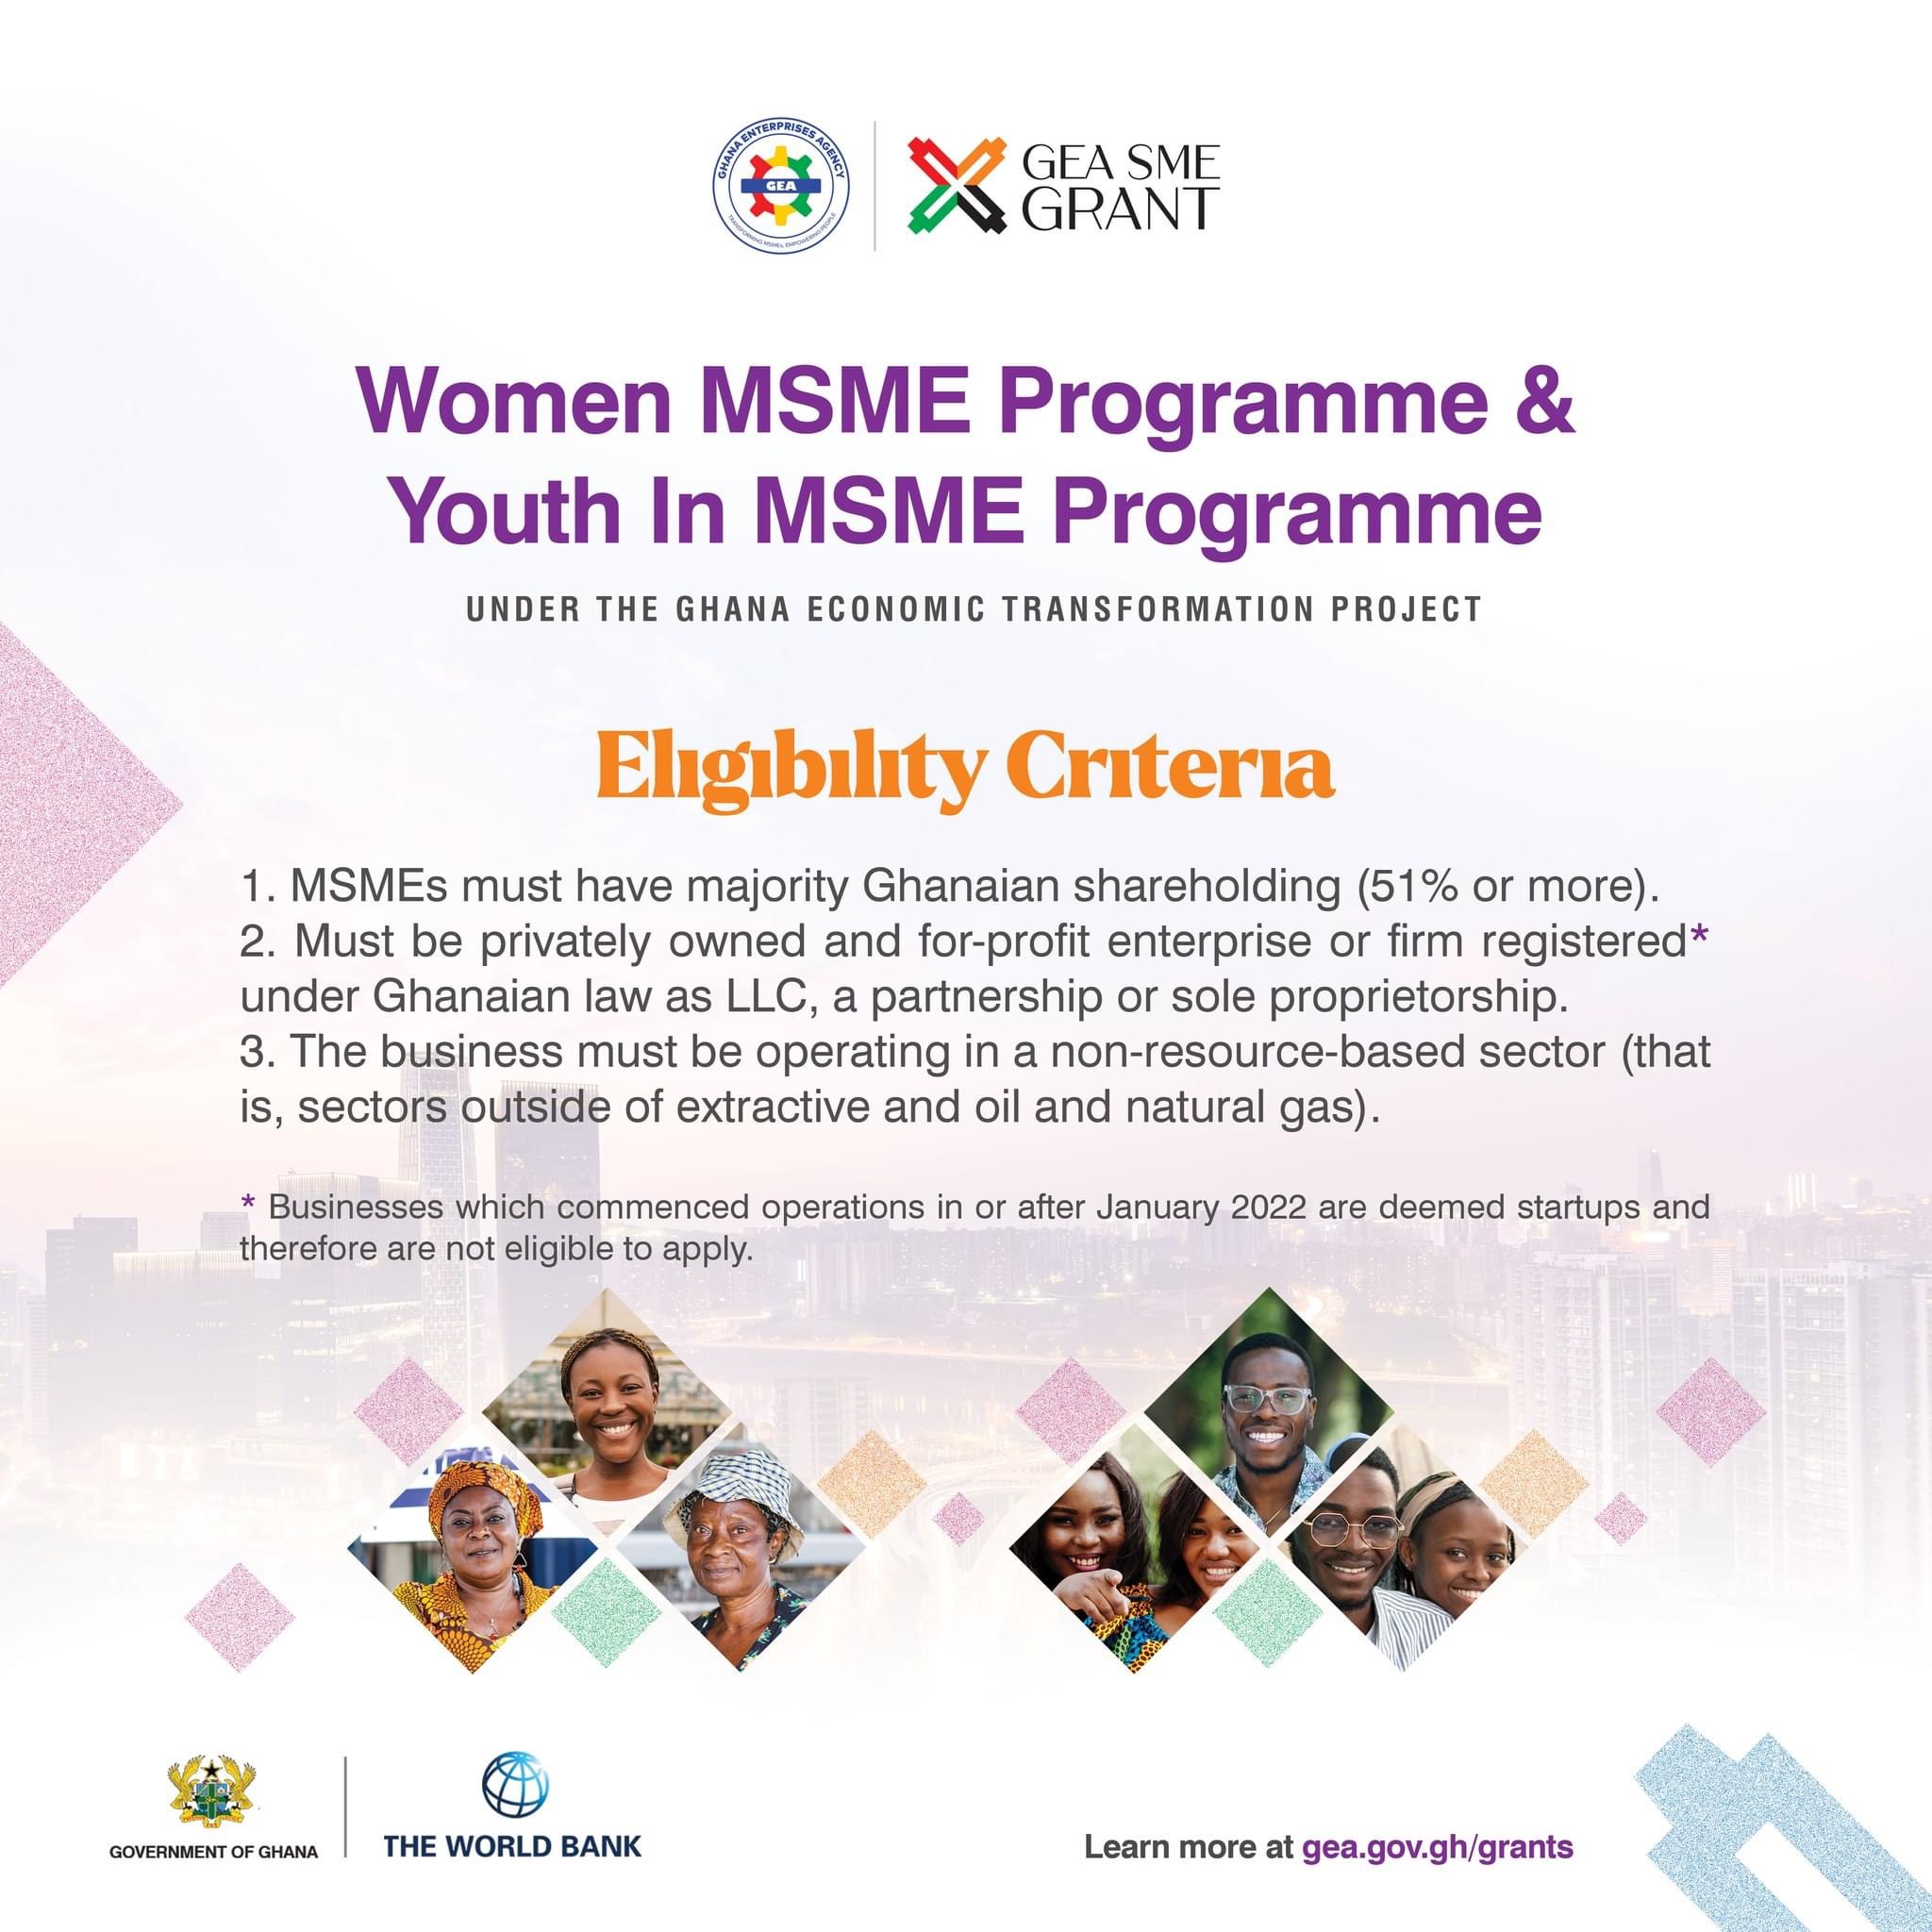 Empowering Women and Youth Entrepreneurs: Unlocking Opportunities through MSME Programs in Ghana